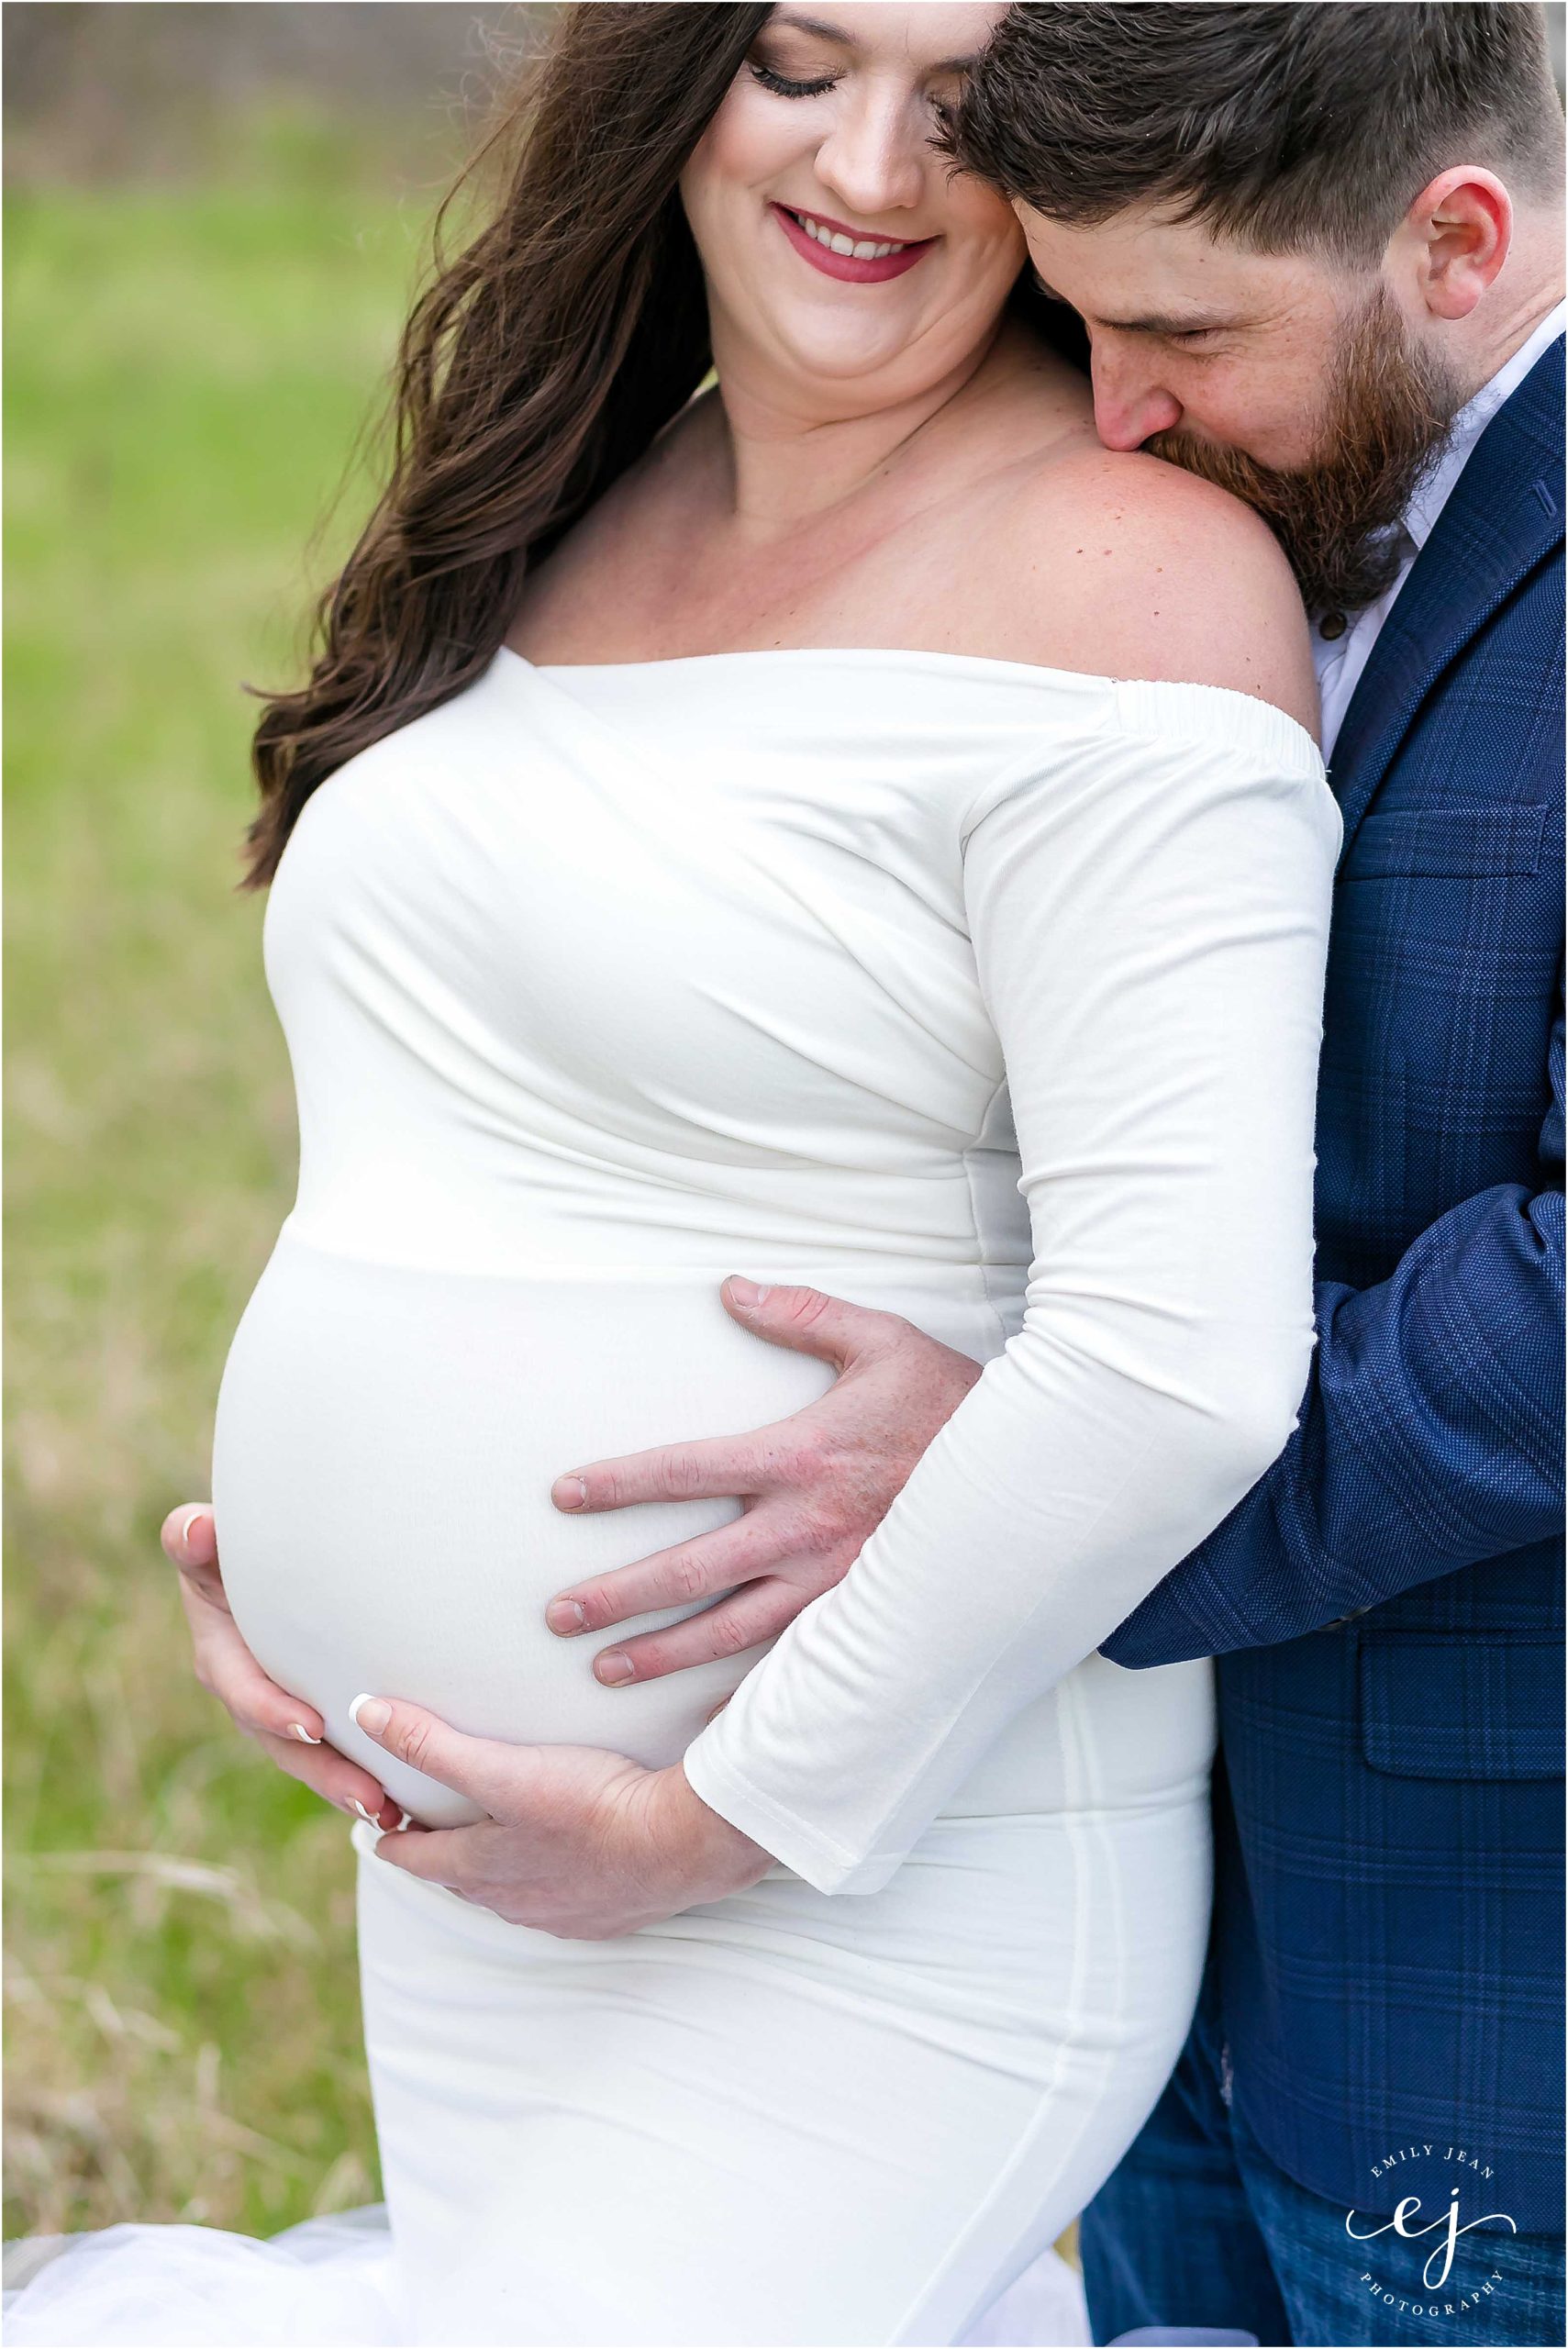 Maternity photo man hugging wife kissing her neck